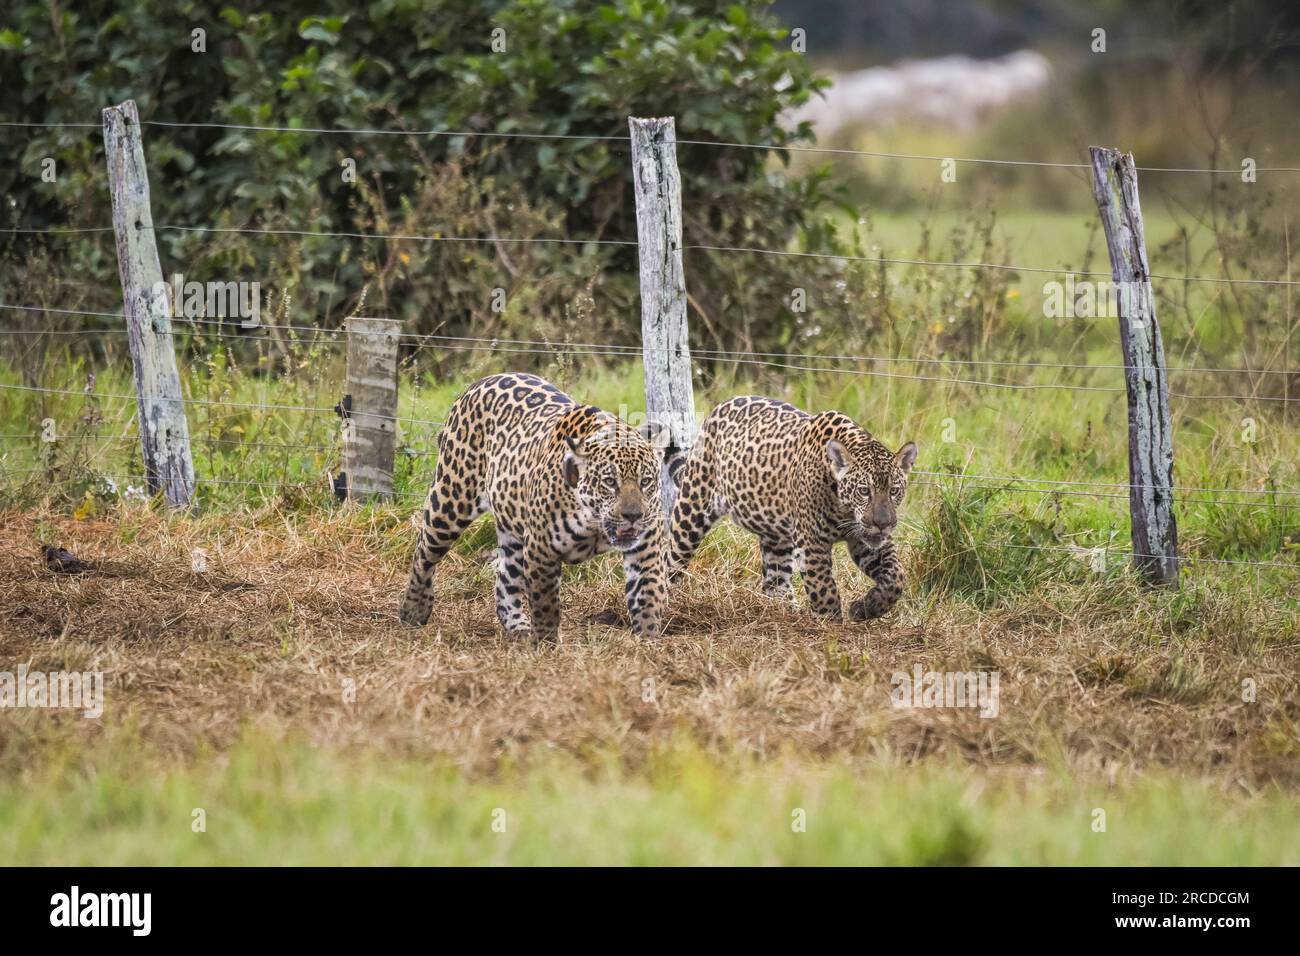 Beautiful view to wild jaguar with cub walking on field in Pantanal Stock Photo